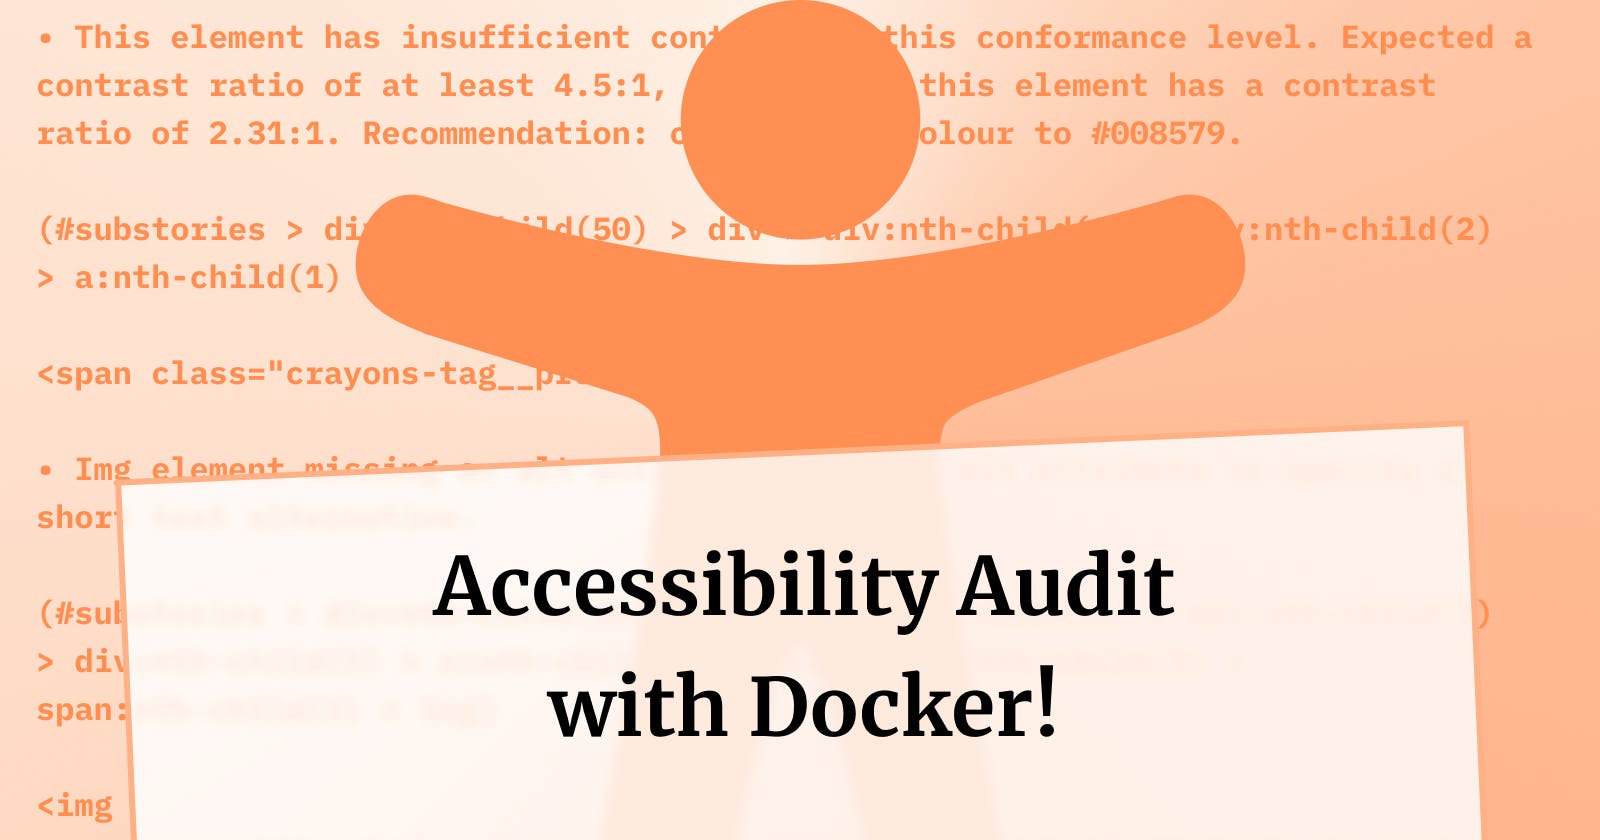 Run an accessibility audit with Docker!